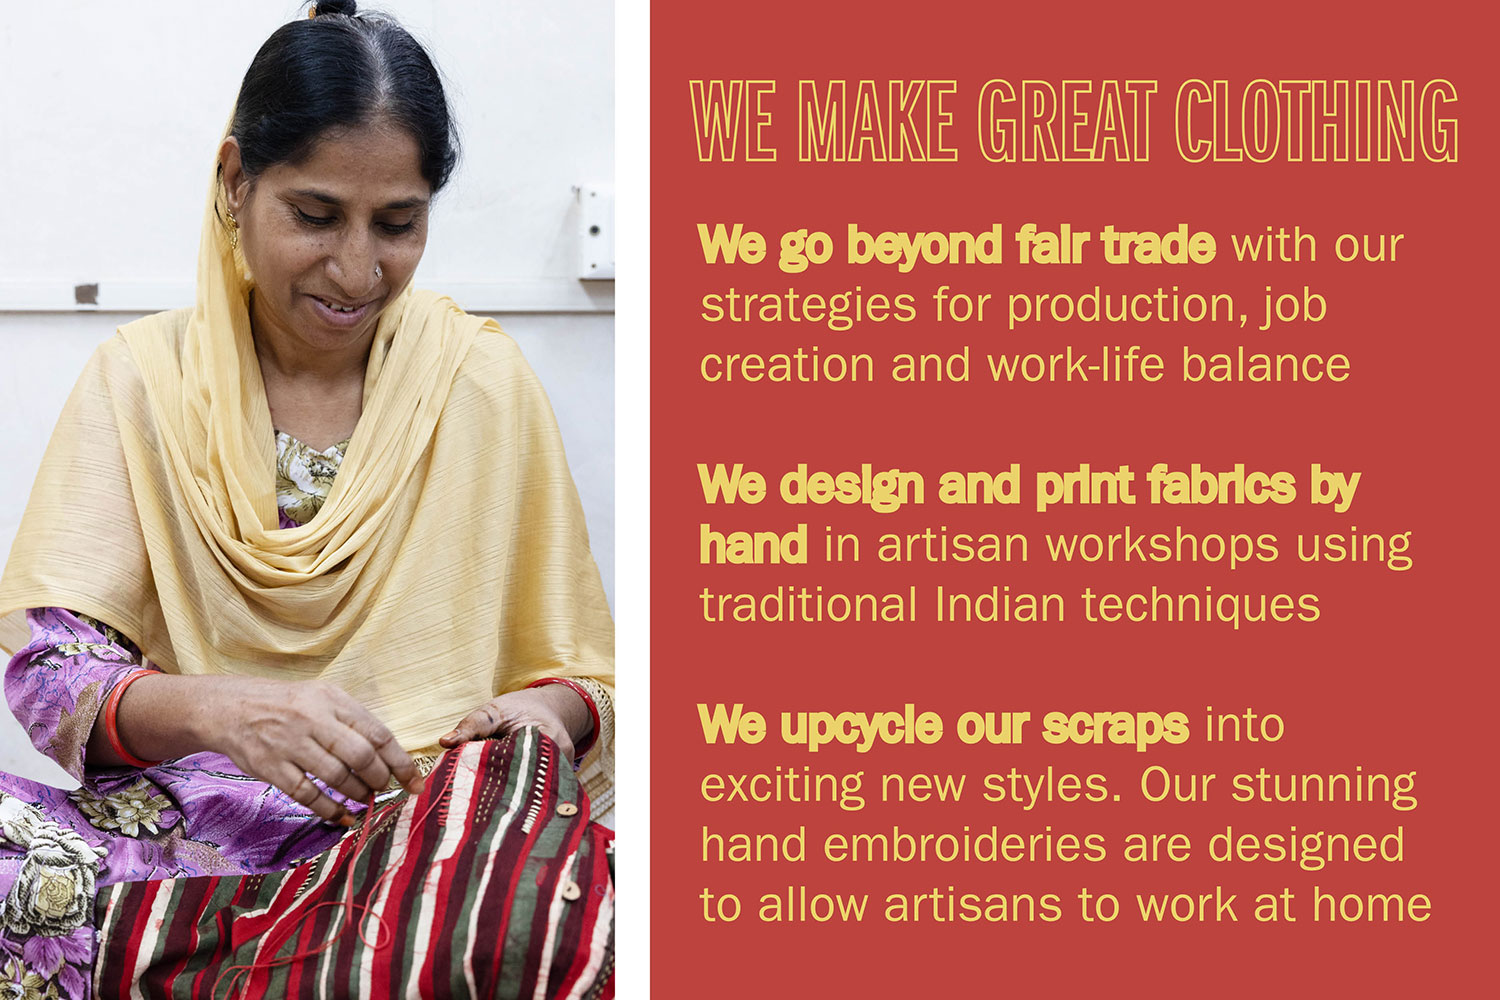 WE MAKE GREAT CLOTHING We go beyond fair trade with our strategies for production, job creation and work-life balance We design and print fabrics by hand in artisan workshops using traditional Indian techniques We upcycle our scraps into exciting new styles. Our
stunning hand embroideries are designed to allow artisans to work at home